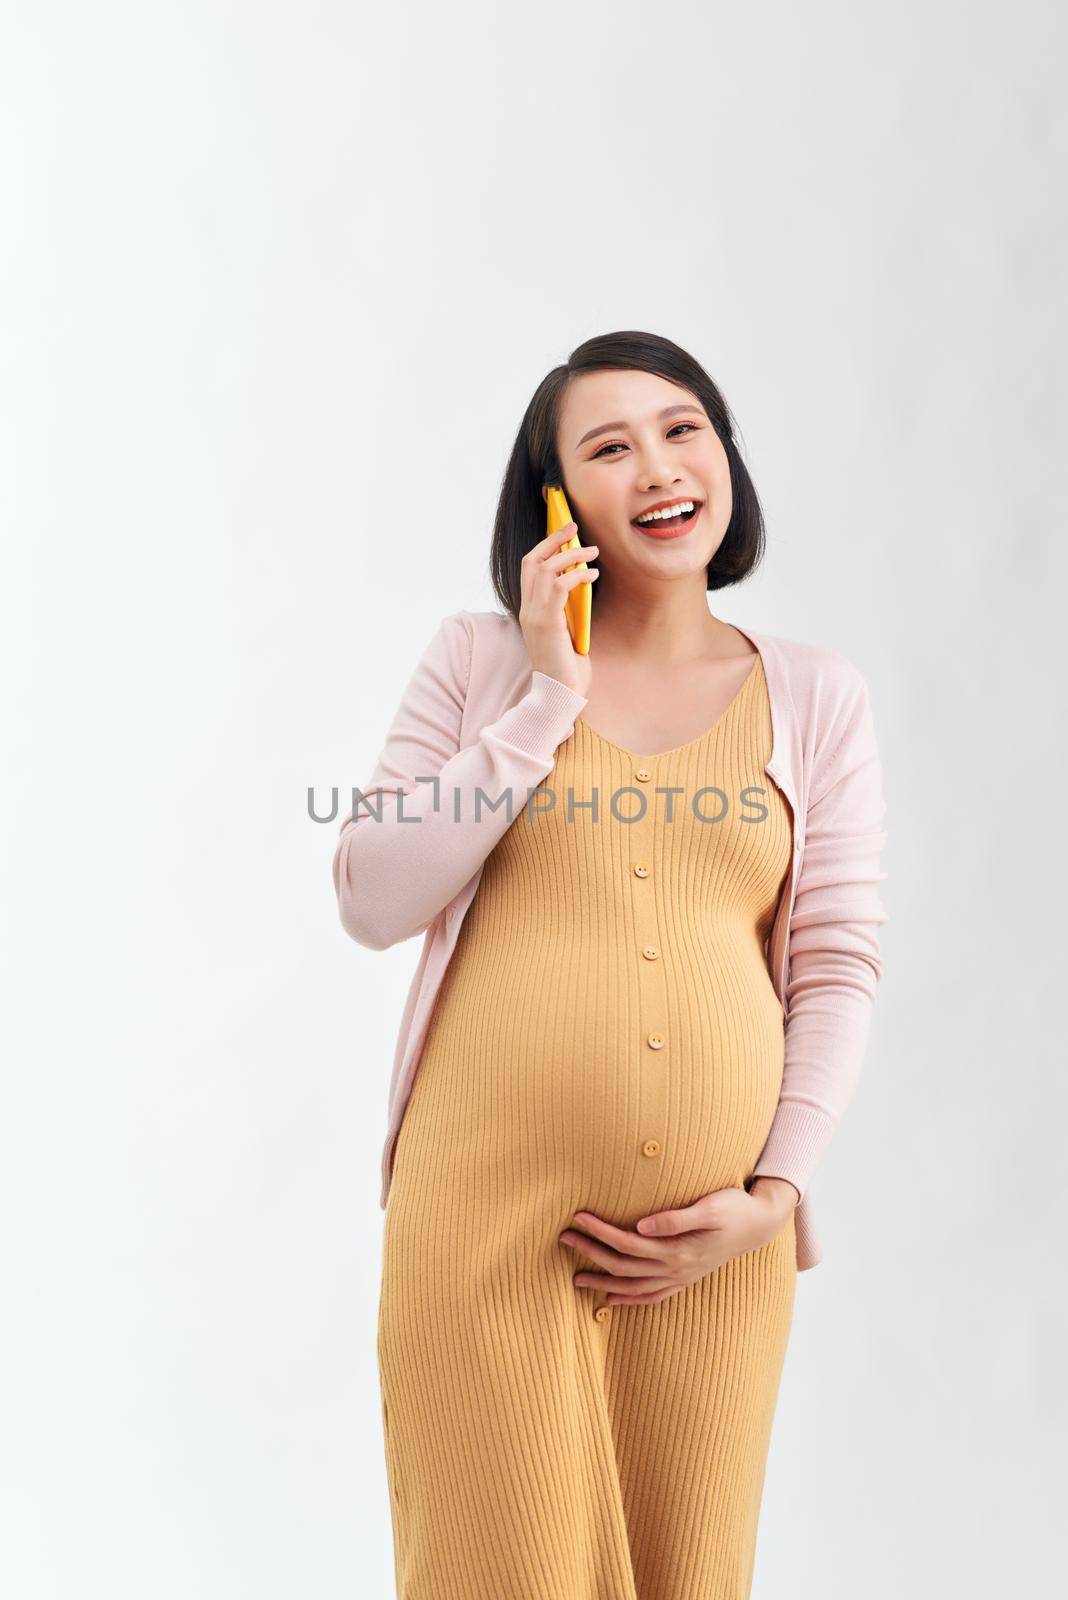 Pregnant woman talking on the phone against white background. Communication and pregnant concept. by makidotvn